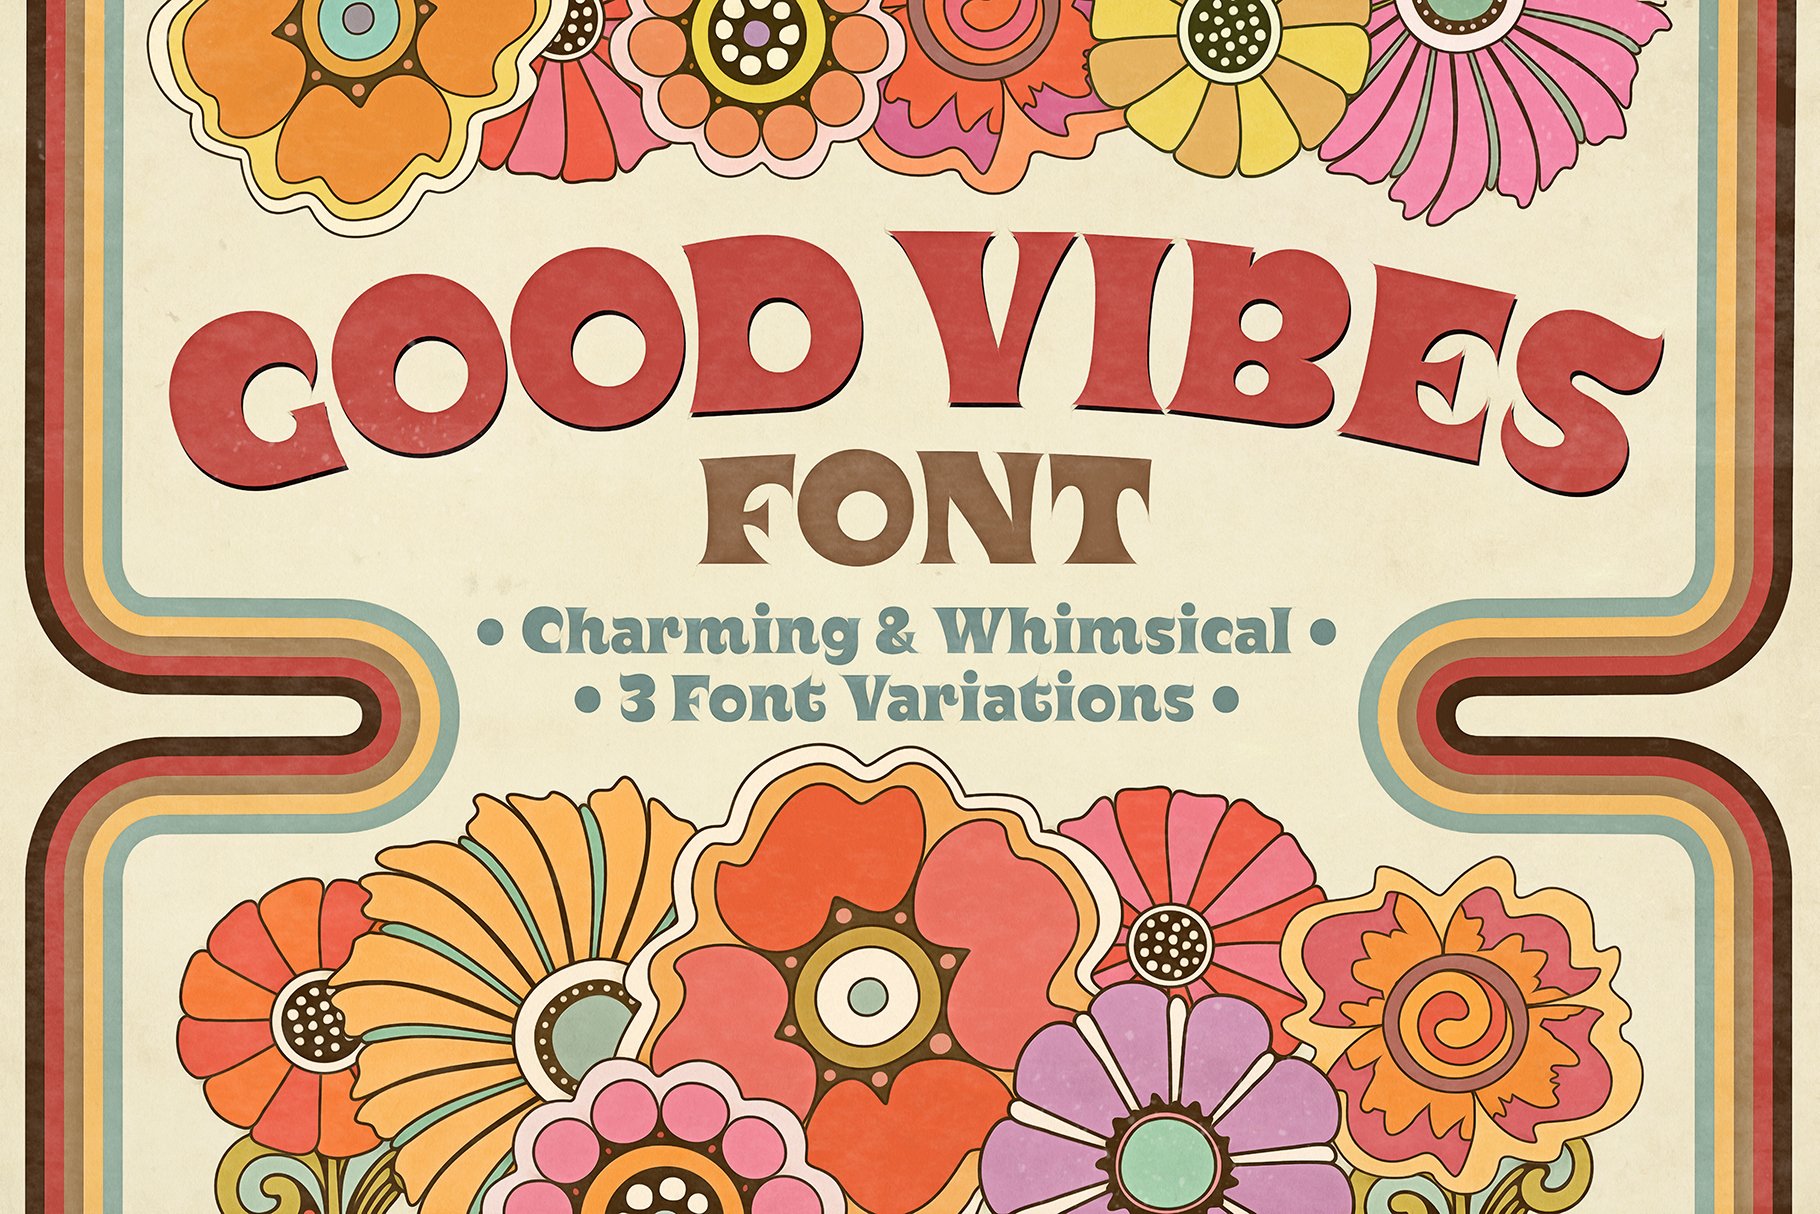 Good Vibes Font cover image.